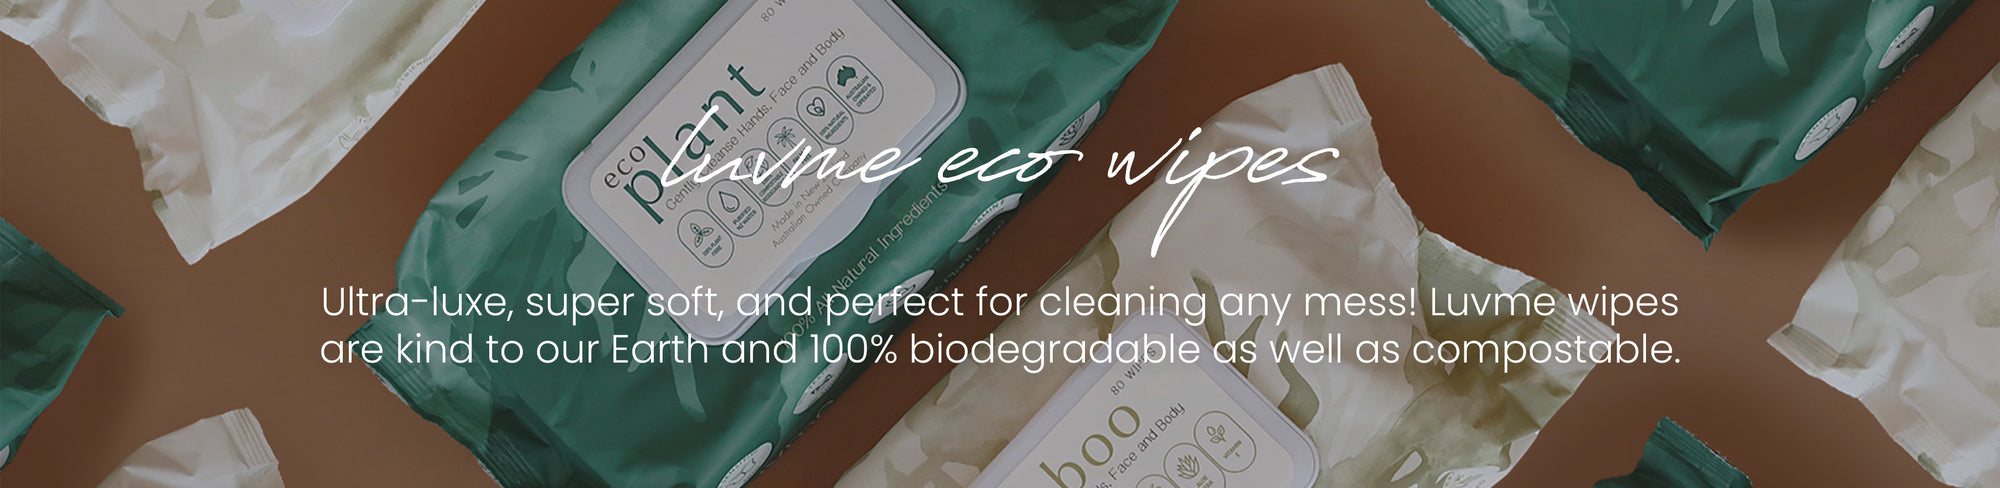 plant-bamboo-eco-baby-wipes-luvme